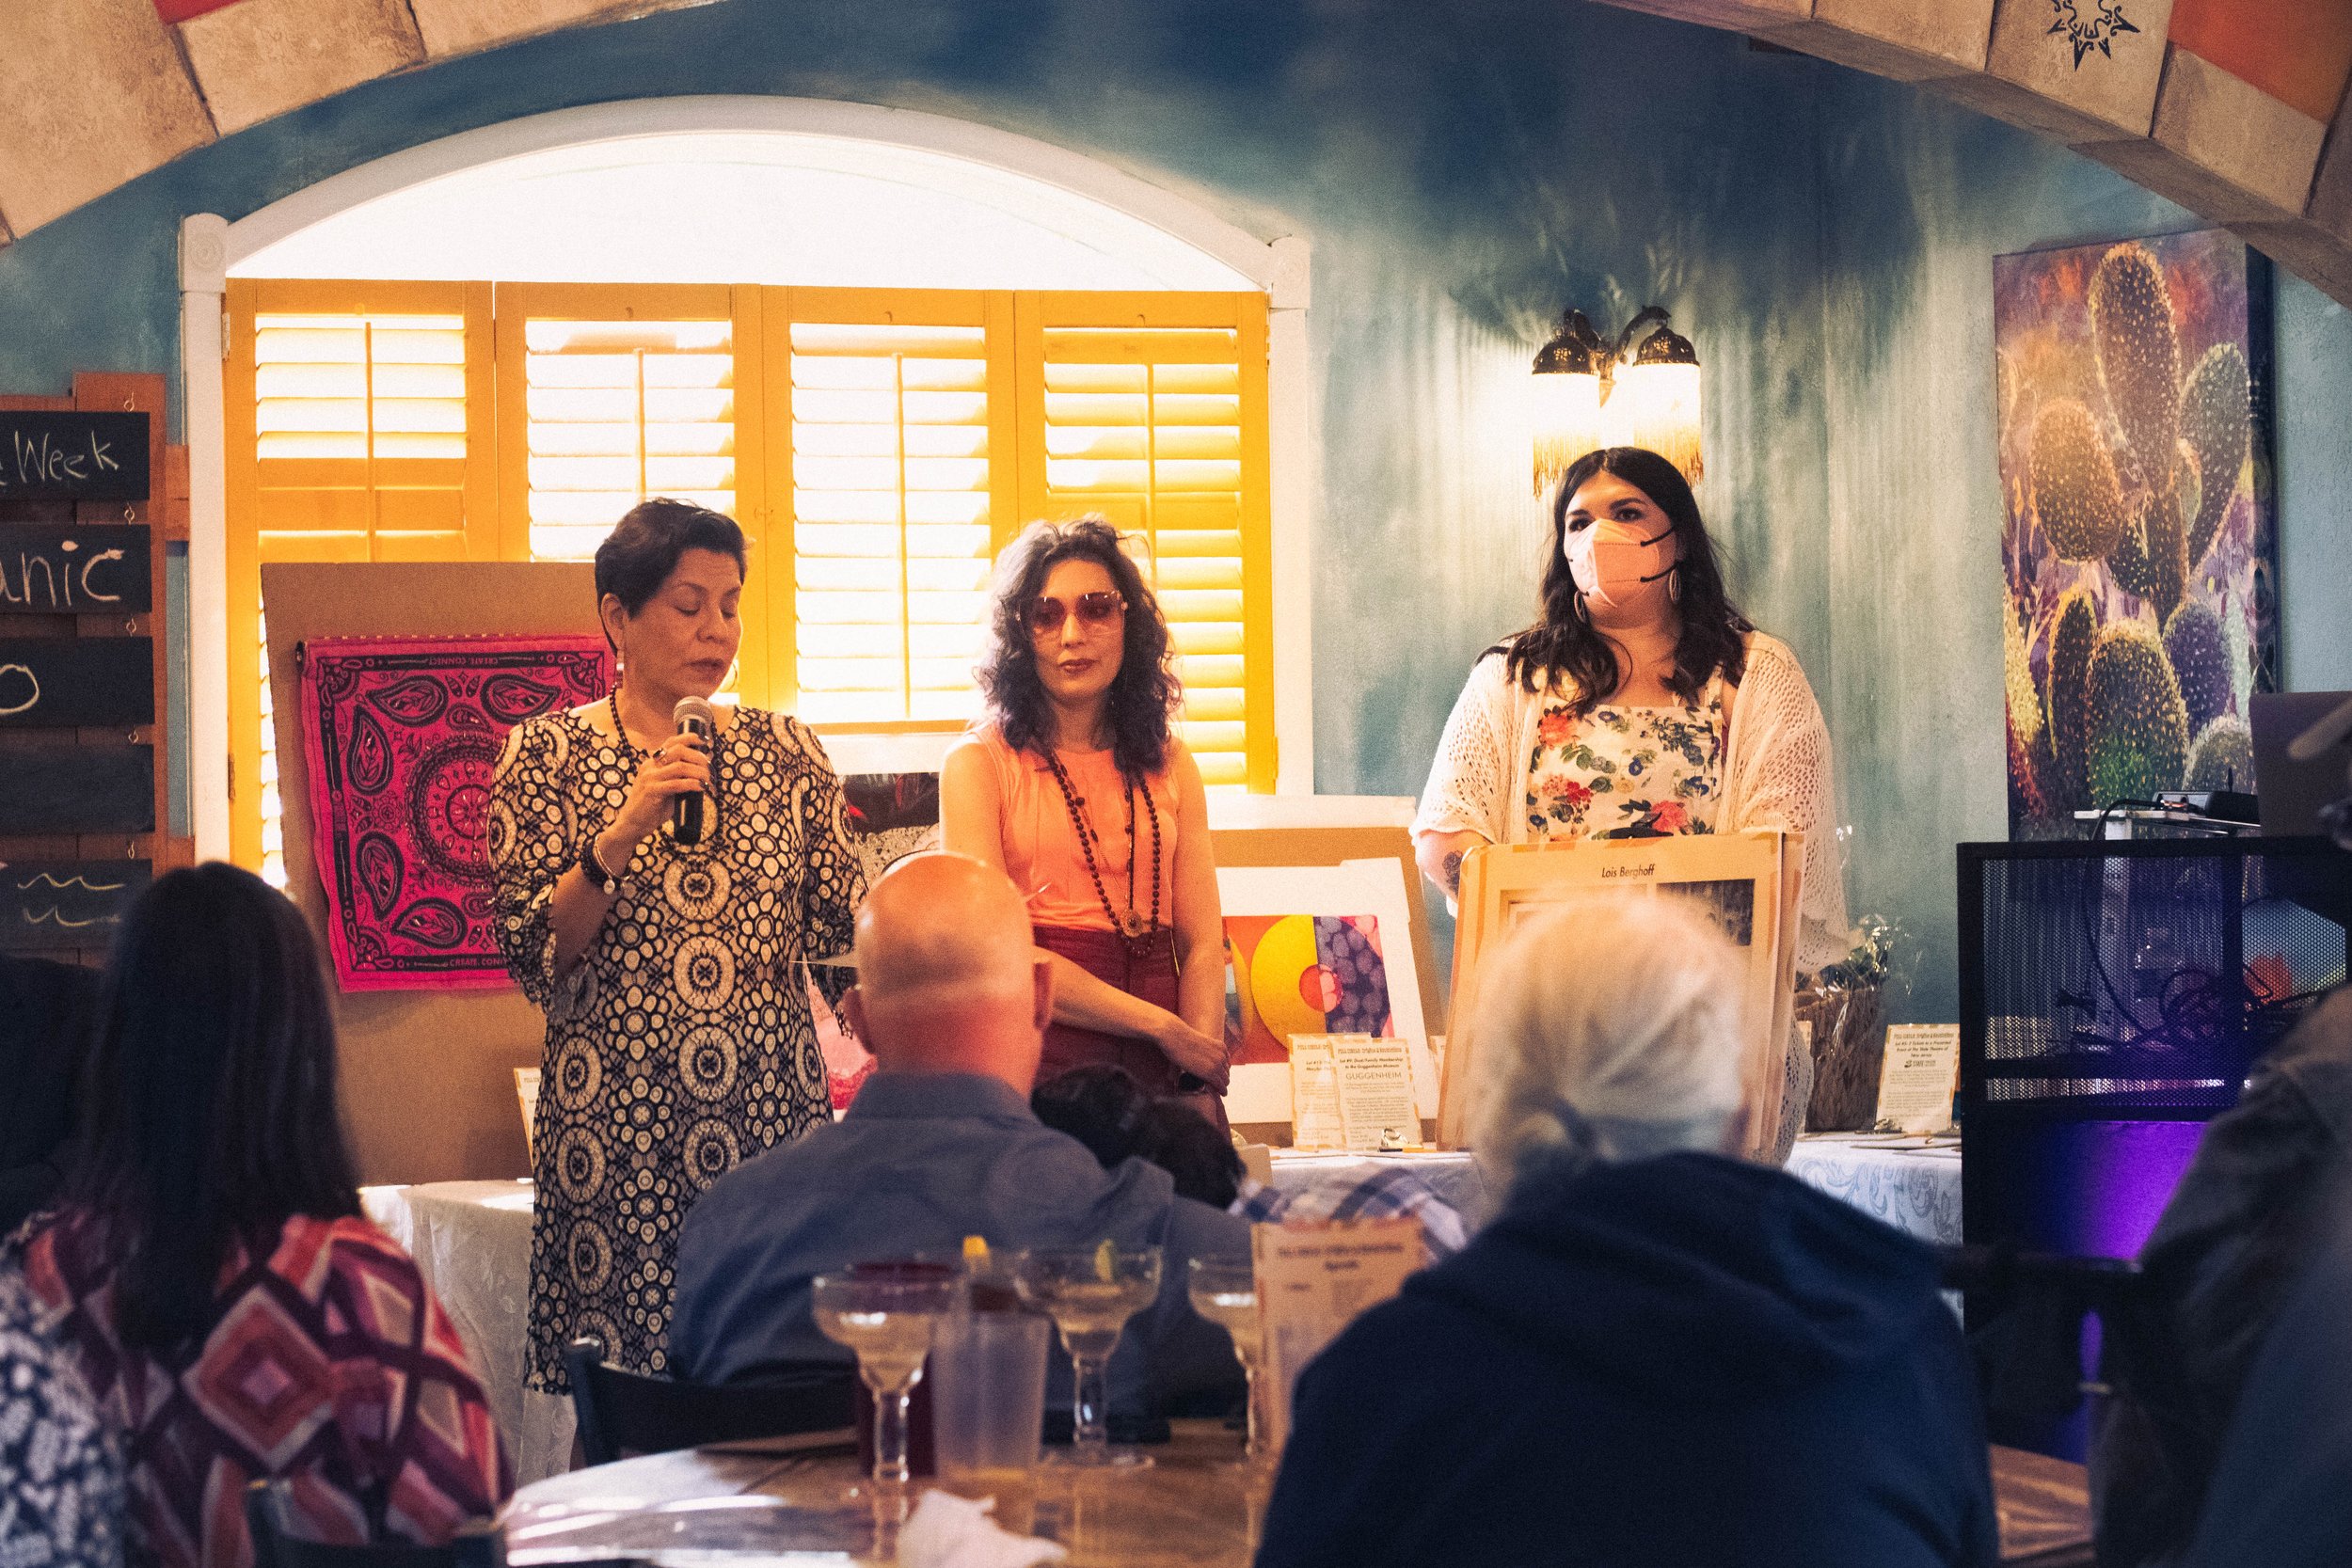  In front of the auction items displayed, Gianna Seaman, Rachel Heberling, and Lindsey Knipe are addressing the attendees while standing side-by-side as the window light illuminates the scene. 